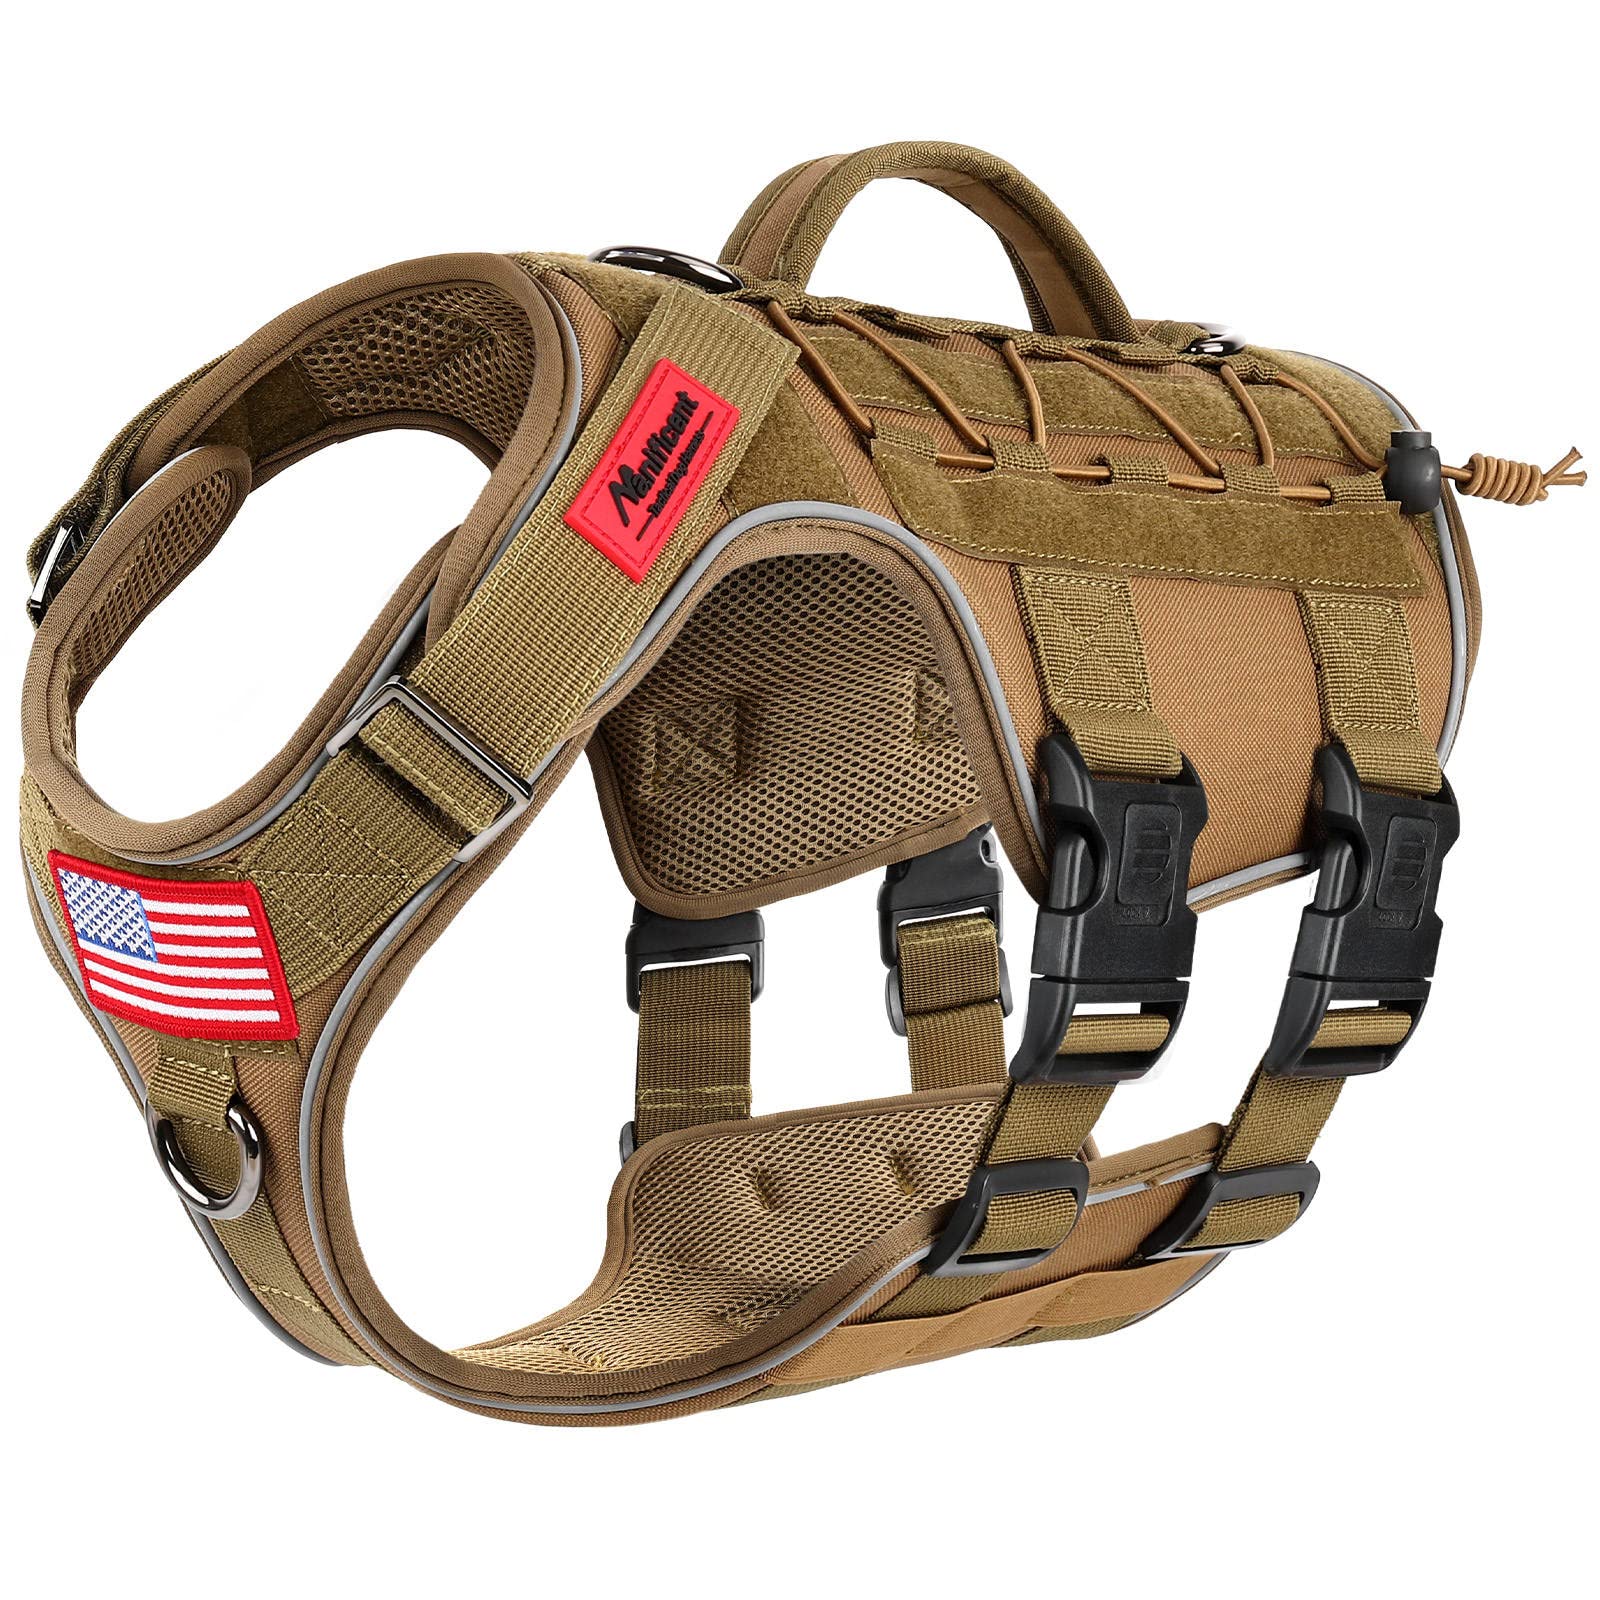 Manificent Tactical Dog Harness Full Body for Medium Large Dogs Reflective No Pull Service Dog Vest with Handle American Flag Pa